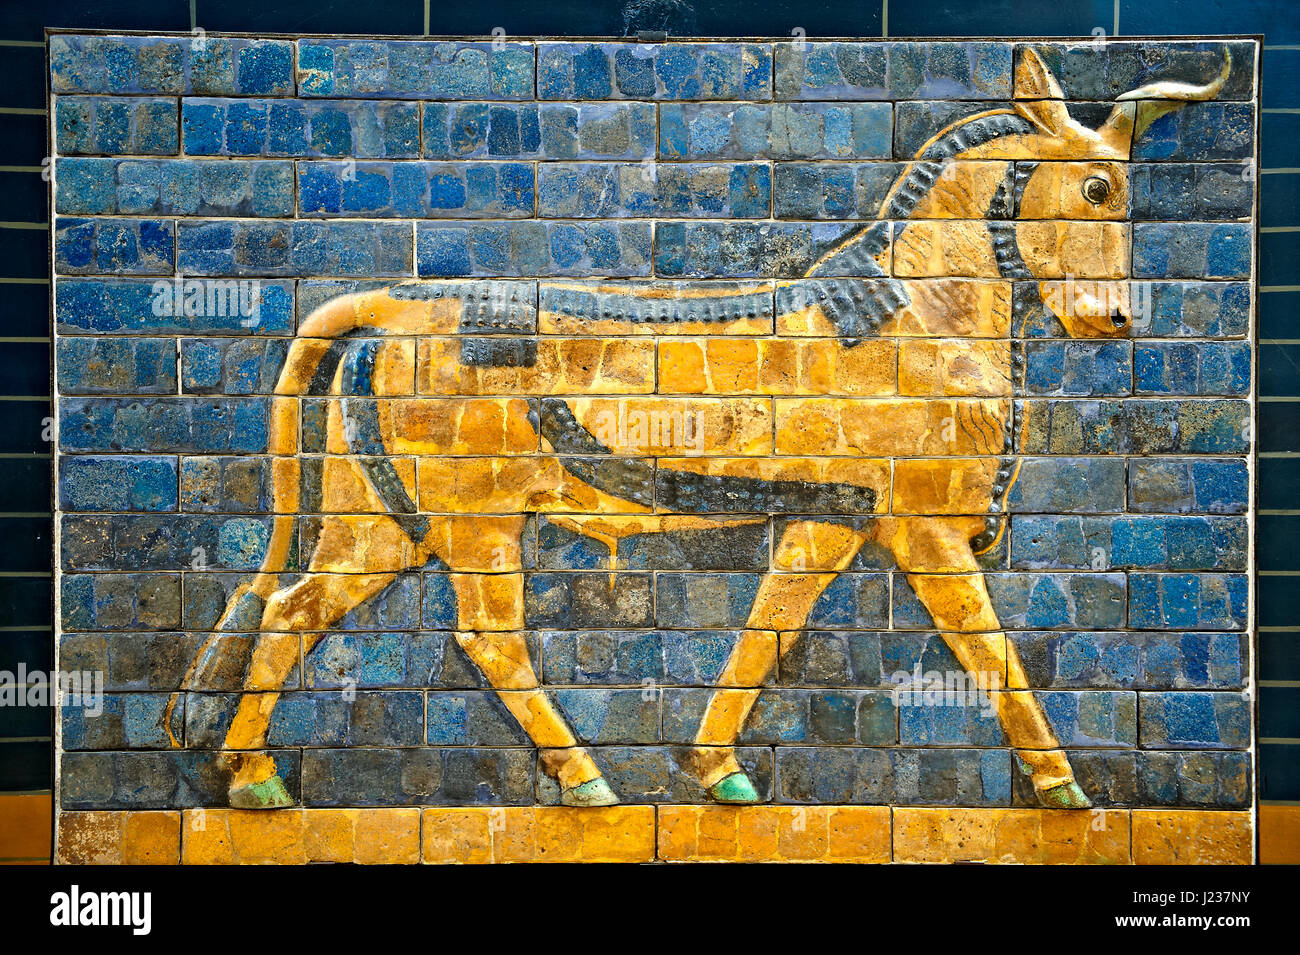 Aurochs relief pictures on glazed bricks from the Ishtar Gate, Babylon, Iraq constructed in about 575 BC,  Istanbul Archaeological Museum. Stock Photo